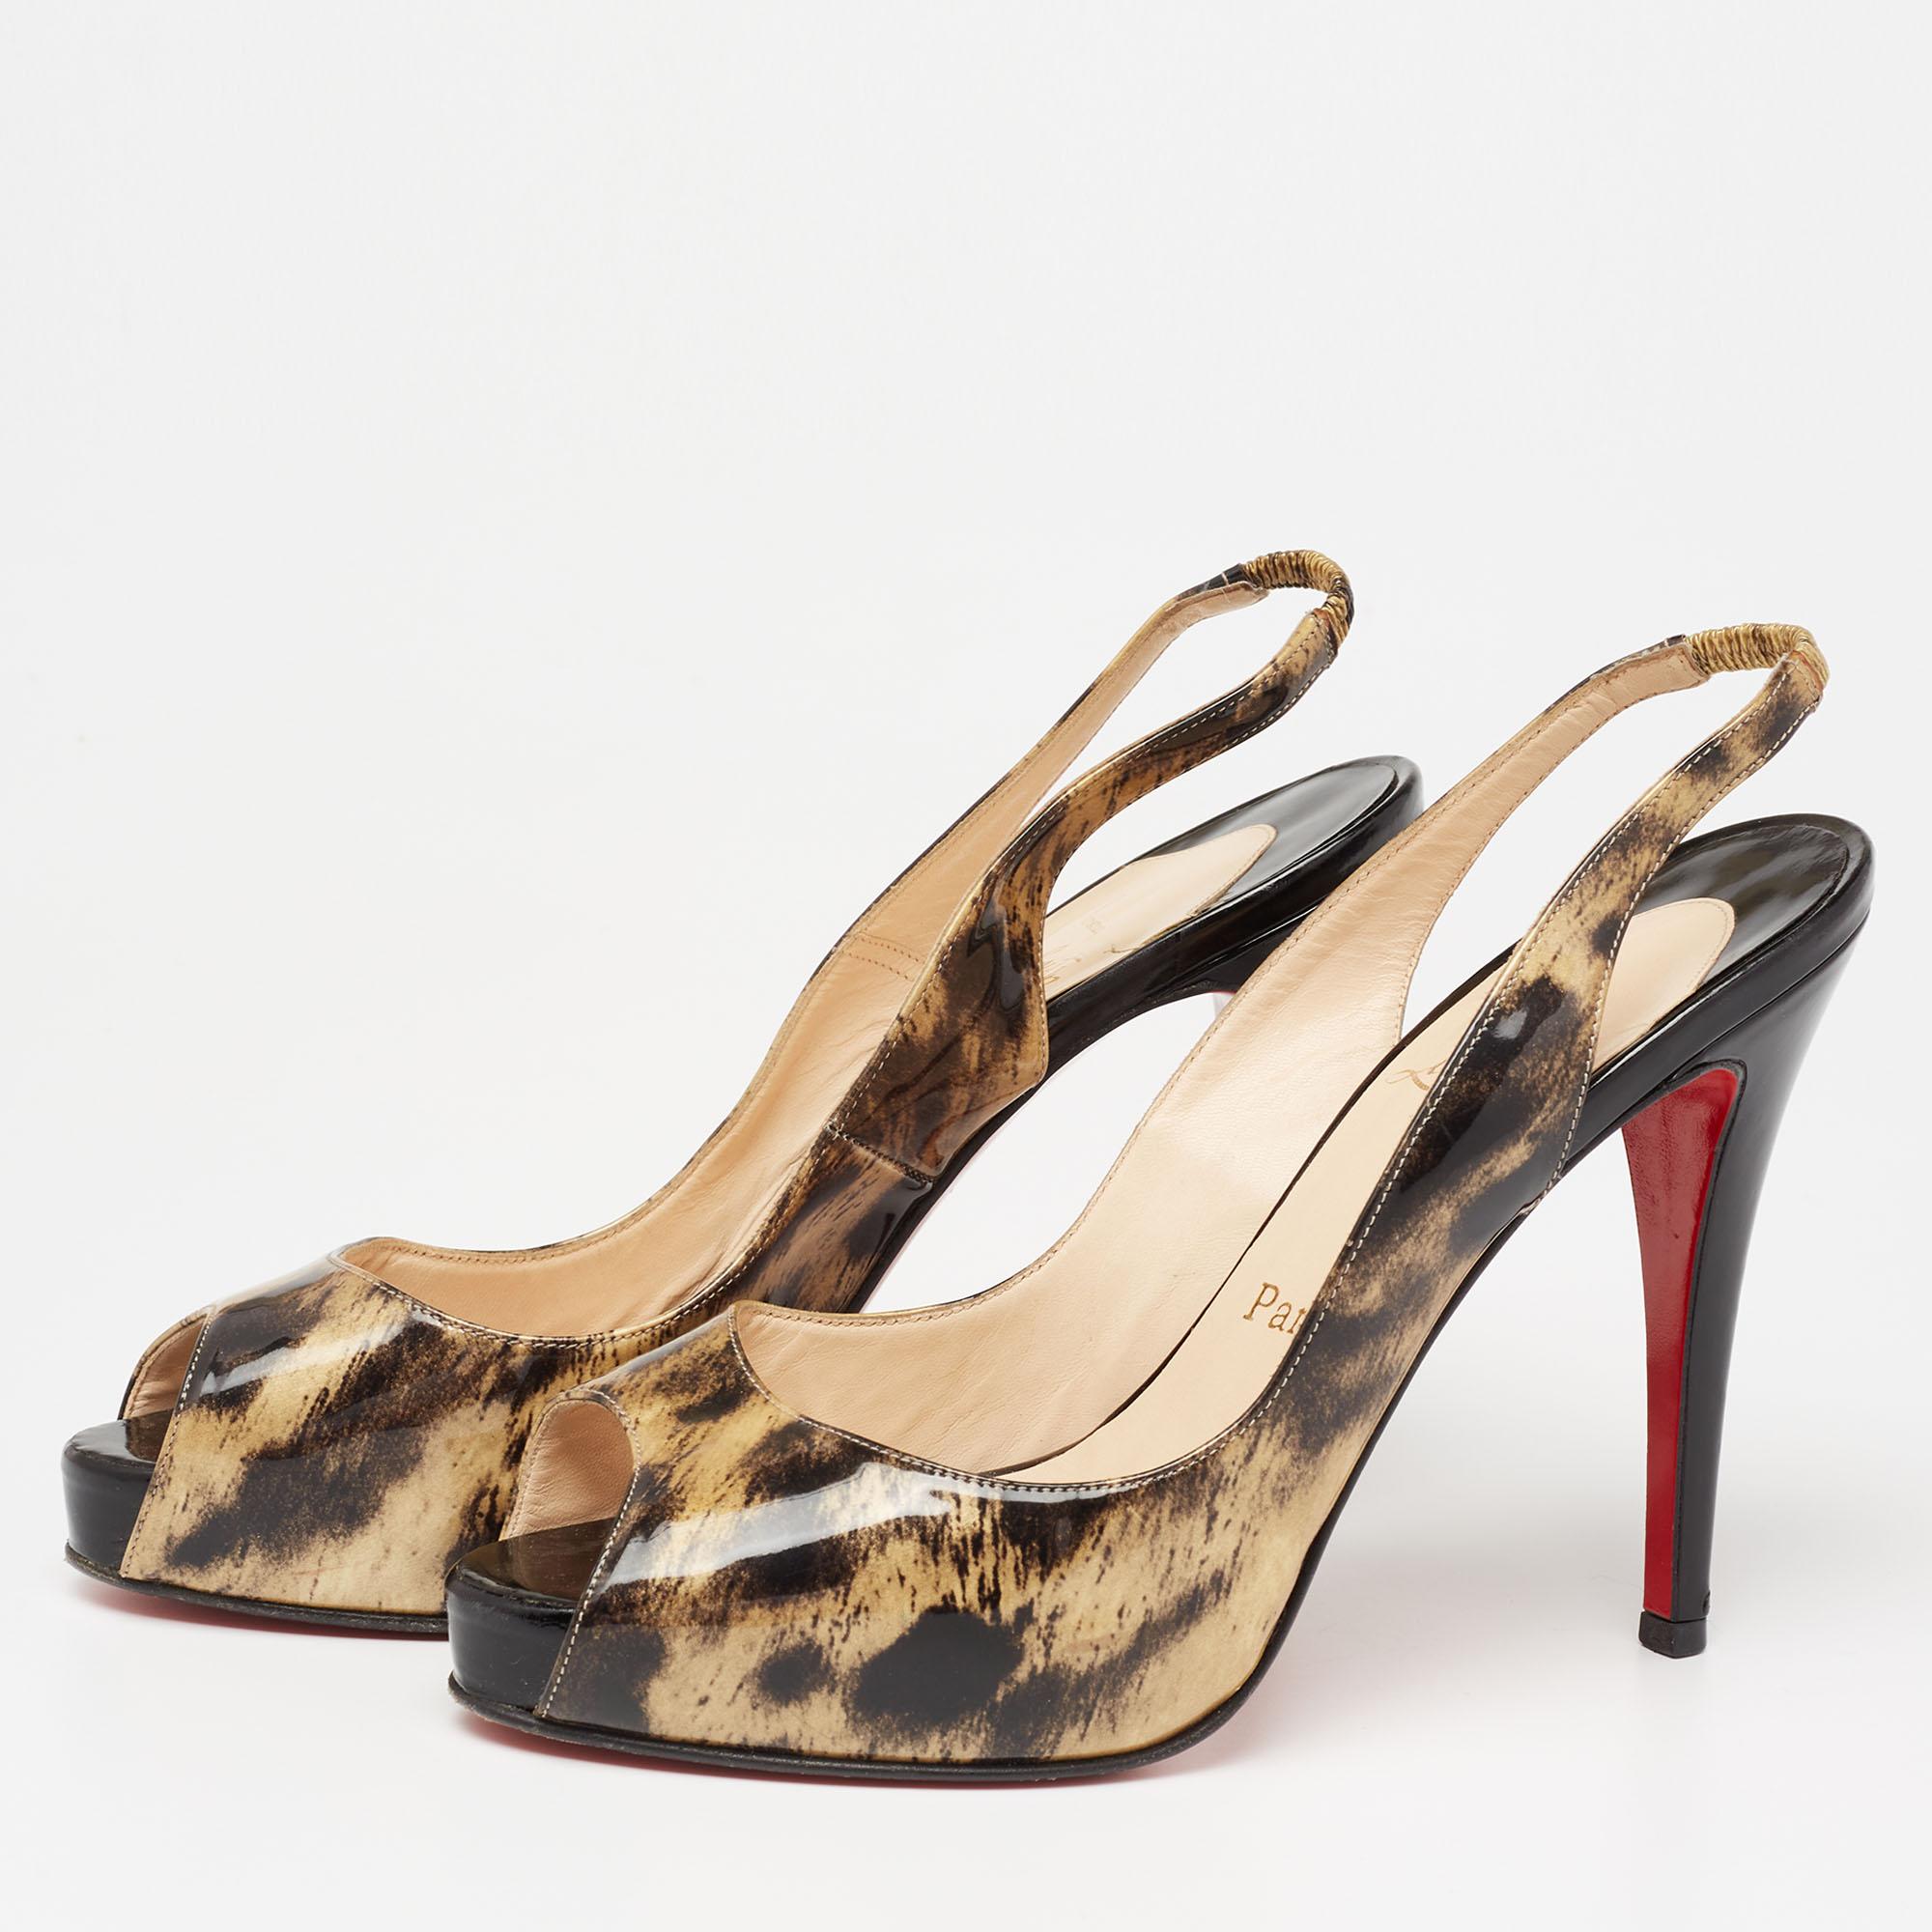 Christian Louboutin Black/Gold Printed Patent Leather Slingback Sandals Size 38 In Good Condition For Sale In Dubai, Al Qouz 2